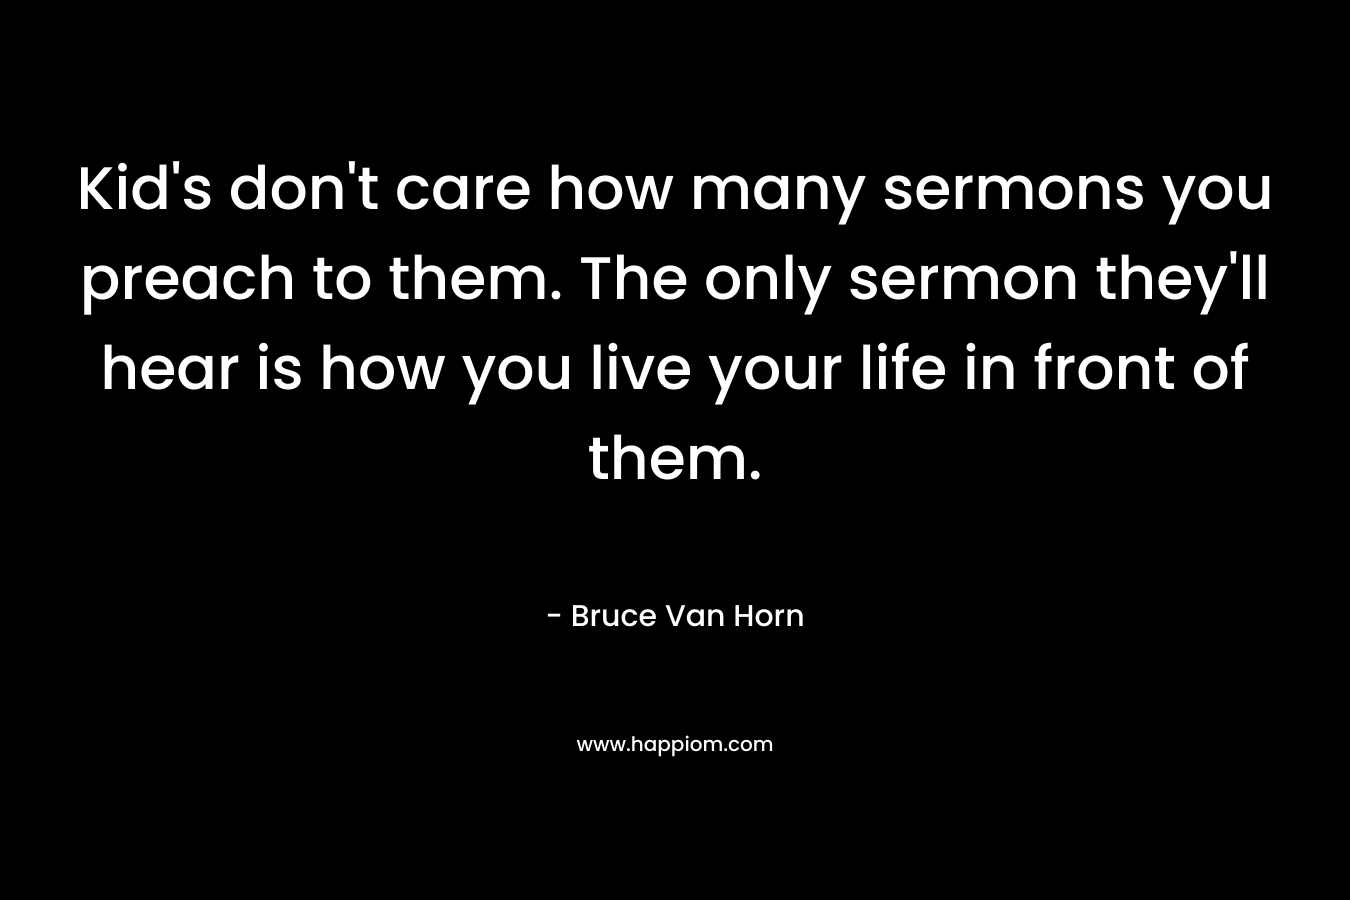 Kid’s don’t care how many sermons you preach to them. The only sermon they’ll hear is how you live your life in front of them. – Bruce Van Horn